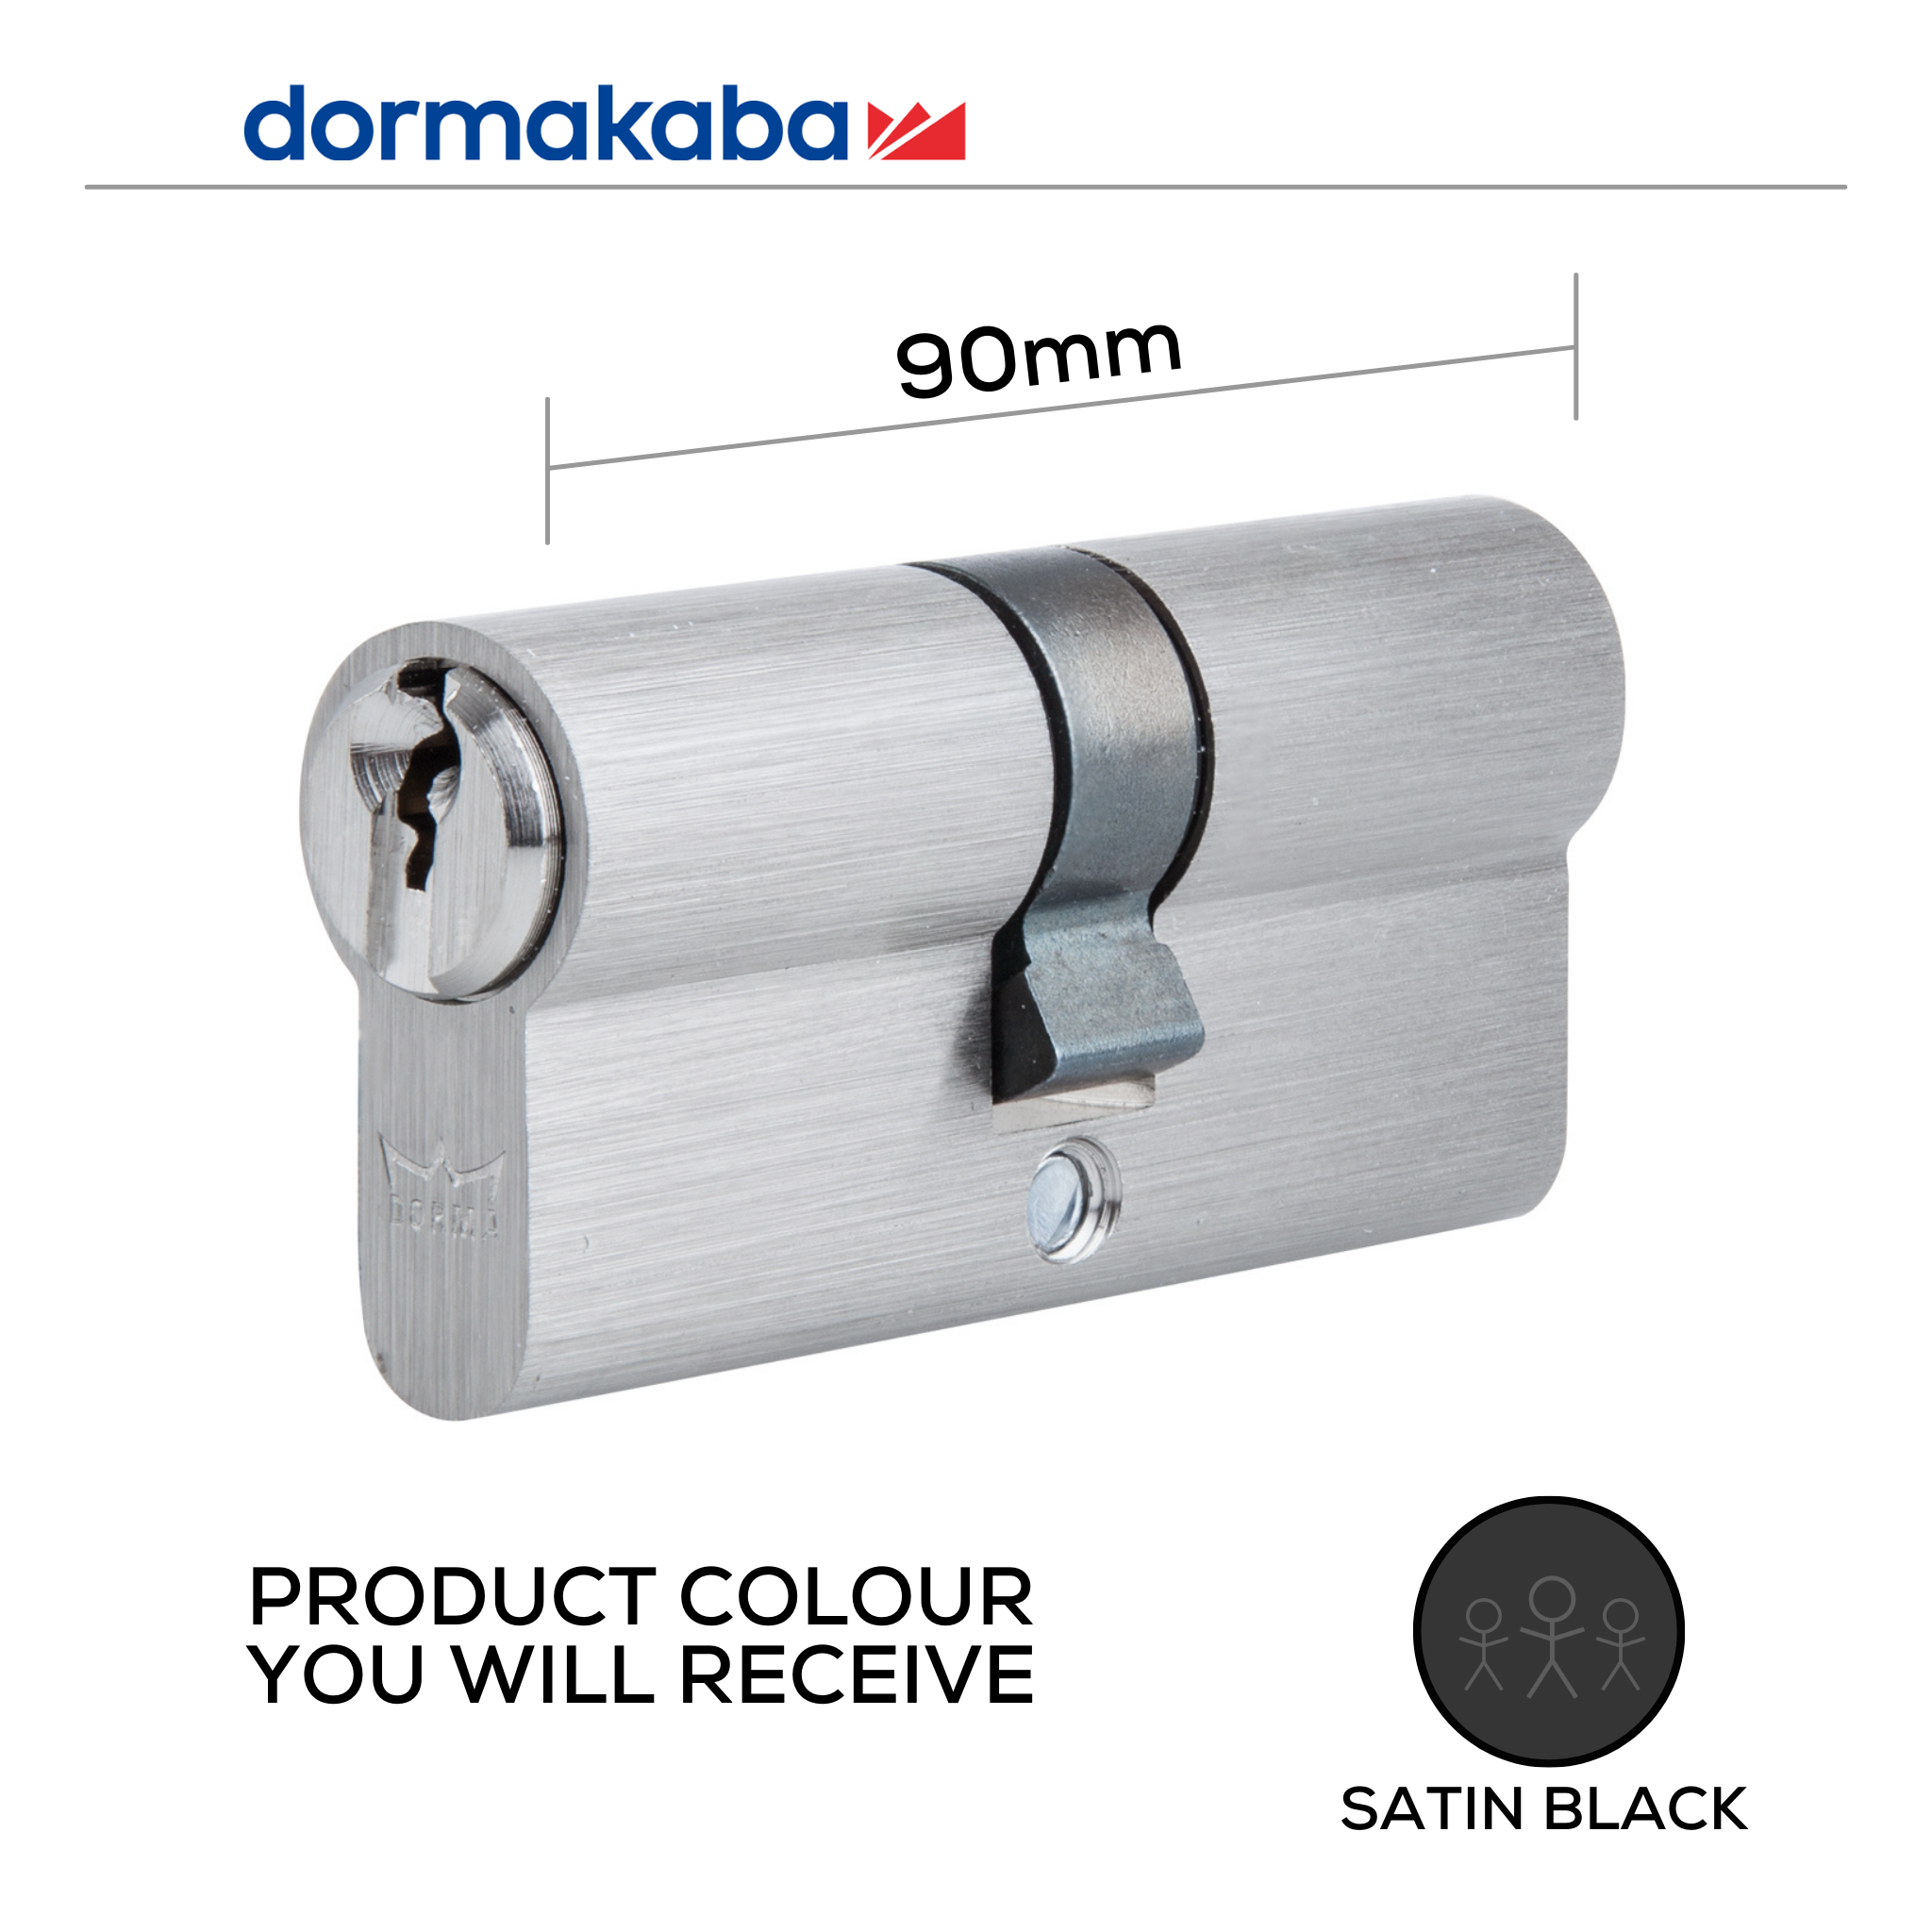 DDC209002 KD, 90mm (l), Double, Cylinder, Keyed Different, 5 Pin, Satin Black, DORMAKABA